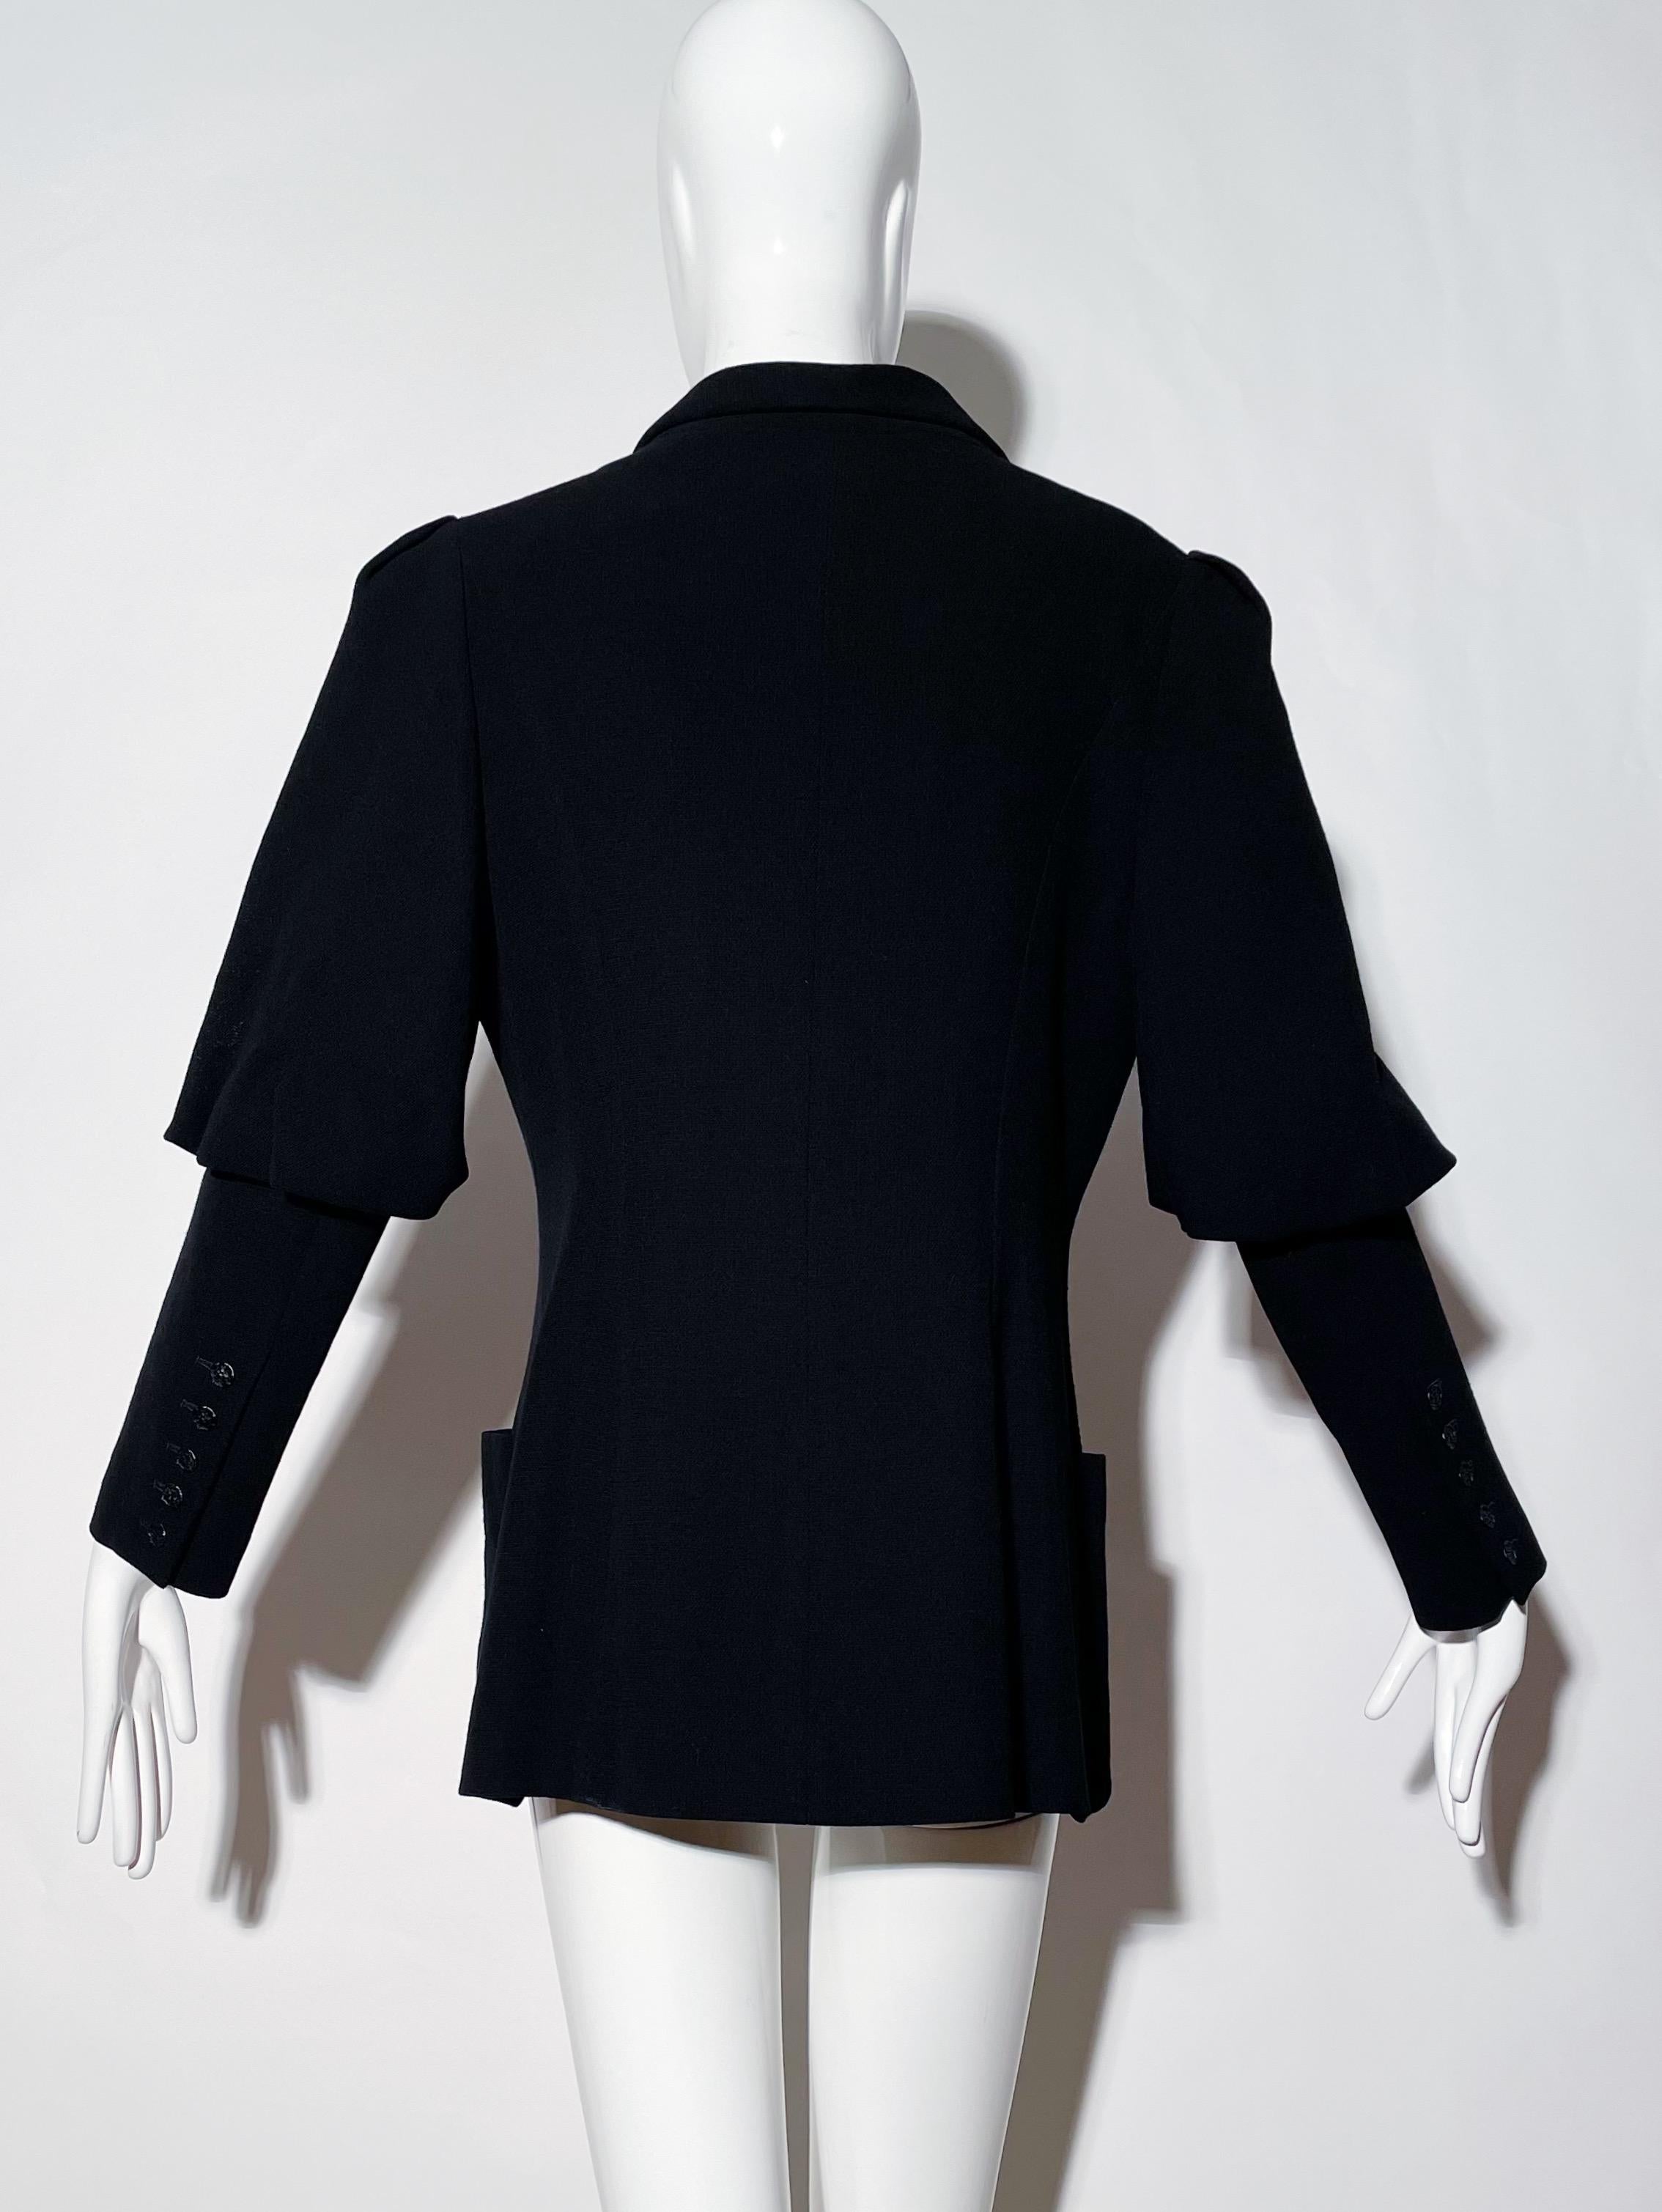 Chloe Black Blazer with Dramatic Sleeves  For Sale 2